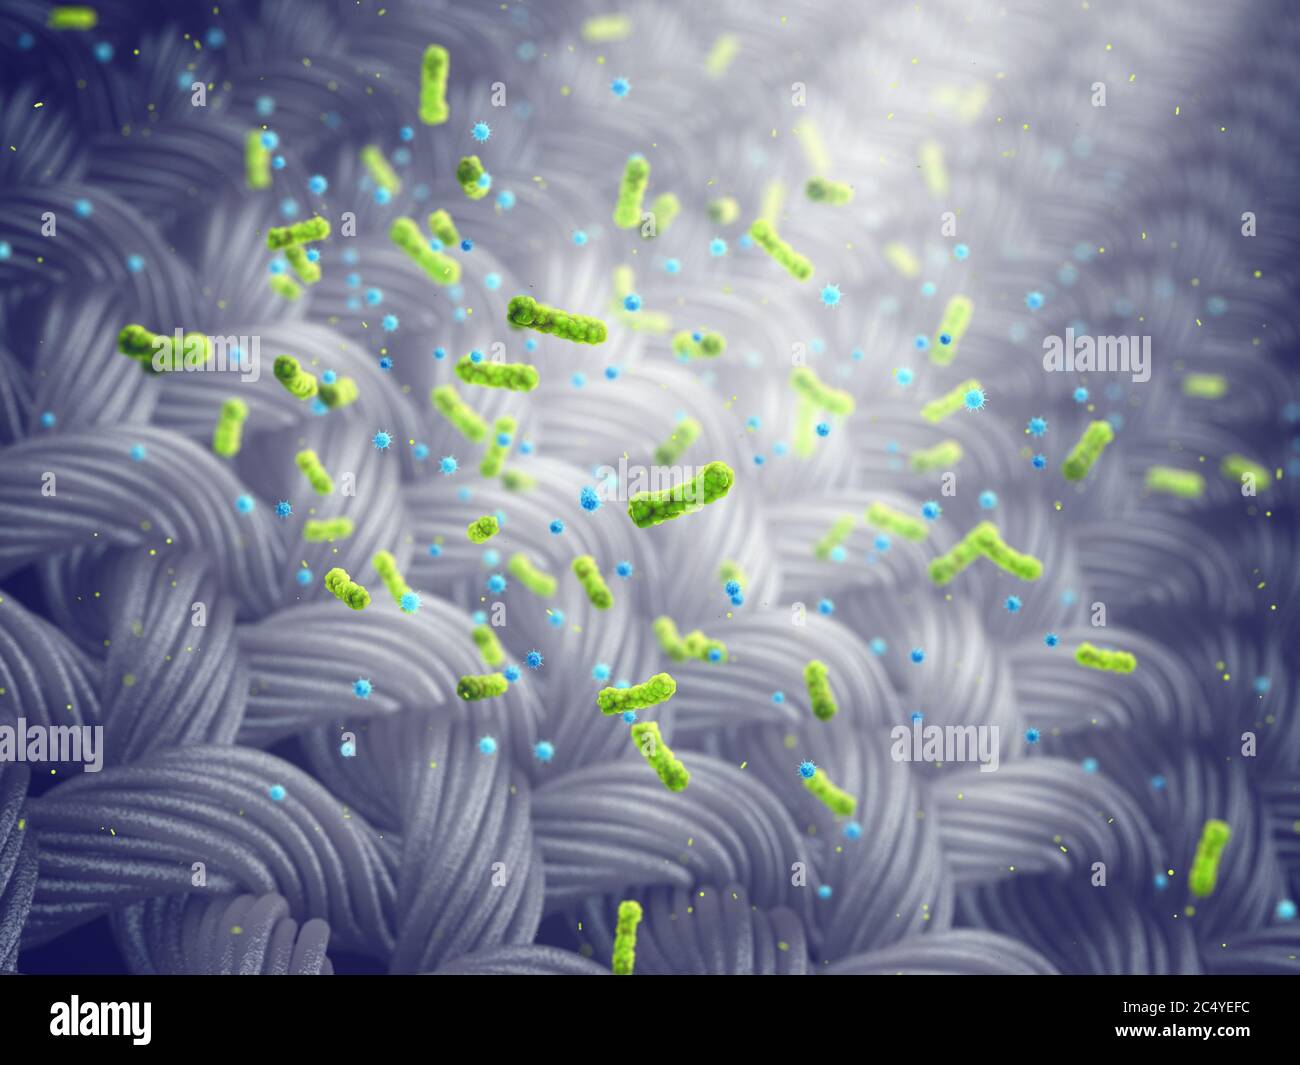 Pathogenic germs on dirty fabric, Spreading infectious disease by contaminated clothes Stock Photo